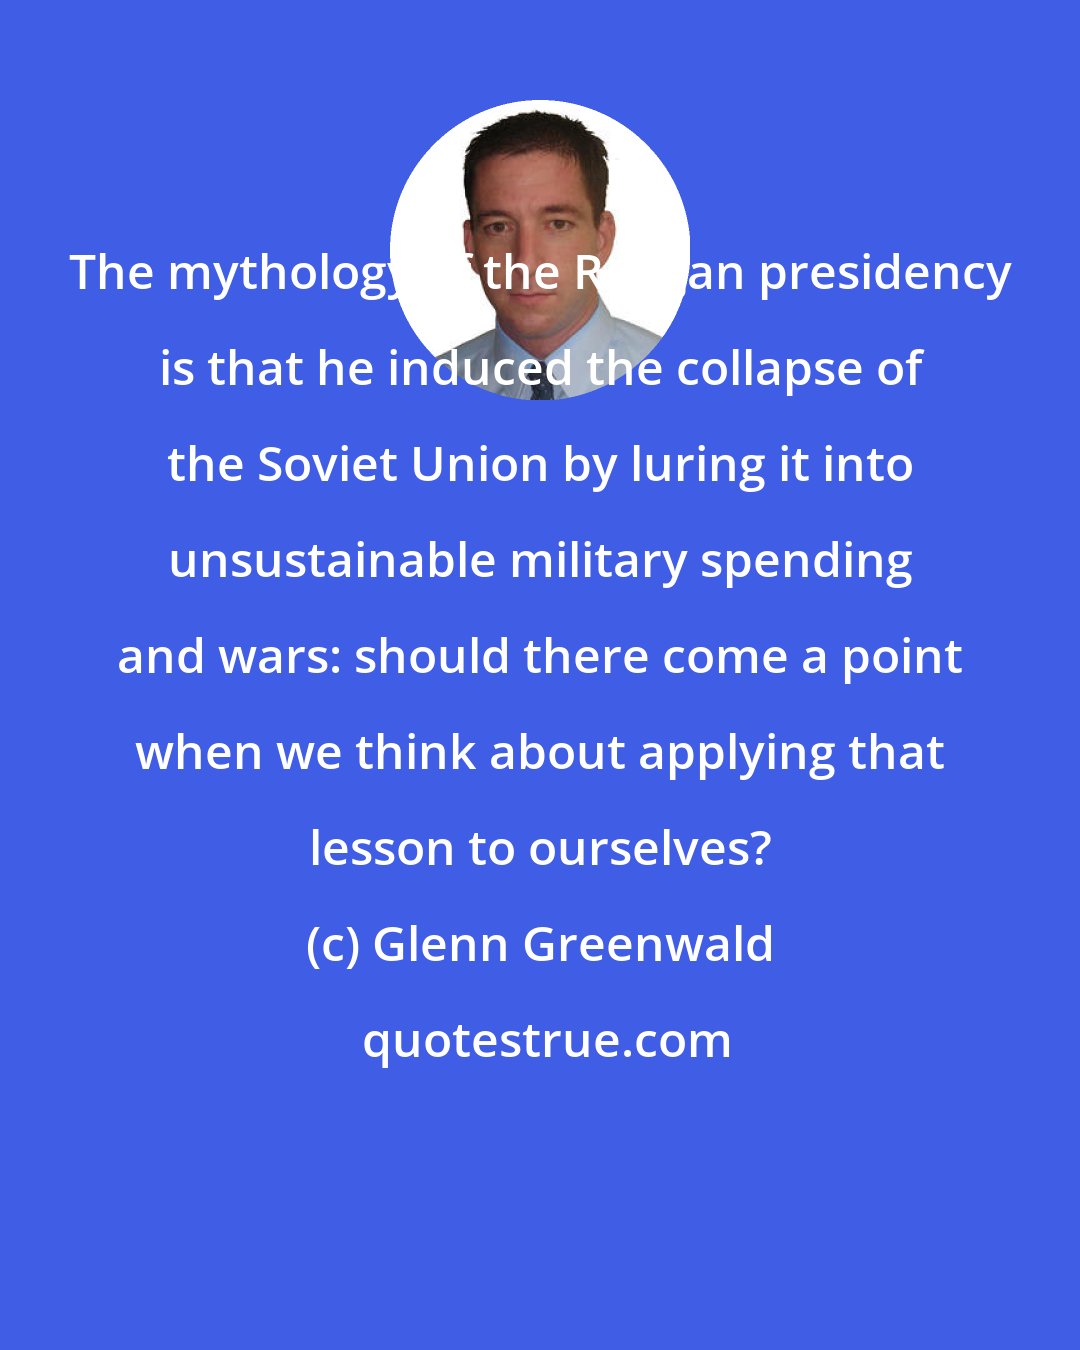 Glenn Greenwald: The mythology of the Reagan presidency is that he induced the collapse of the Soviet Union by luring it into unsustainable military spending and wars: should there come a point when we think about applying that lesson to ourselves?